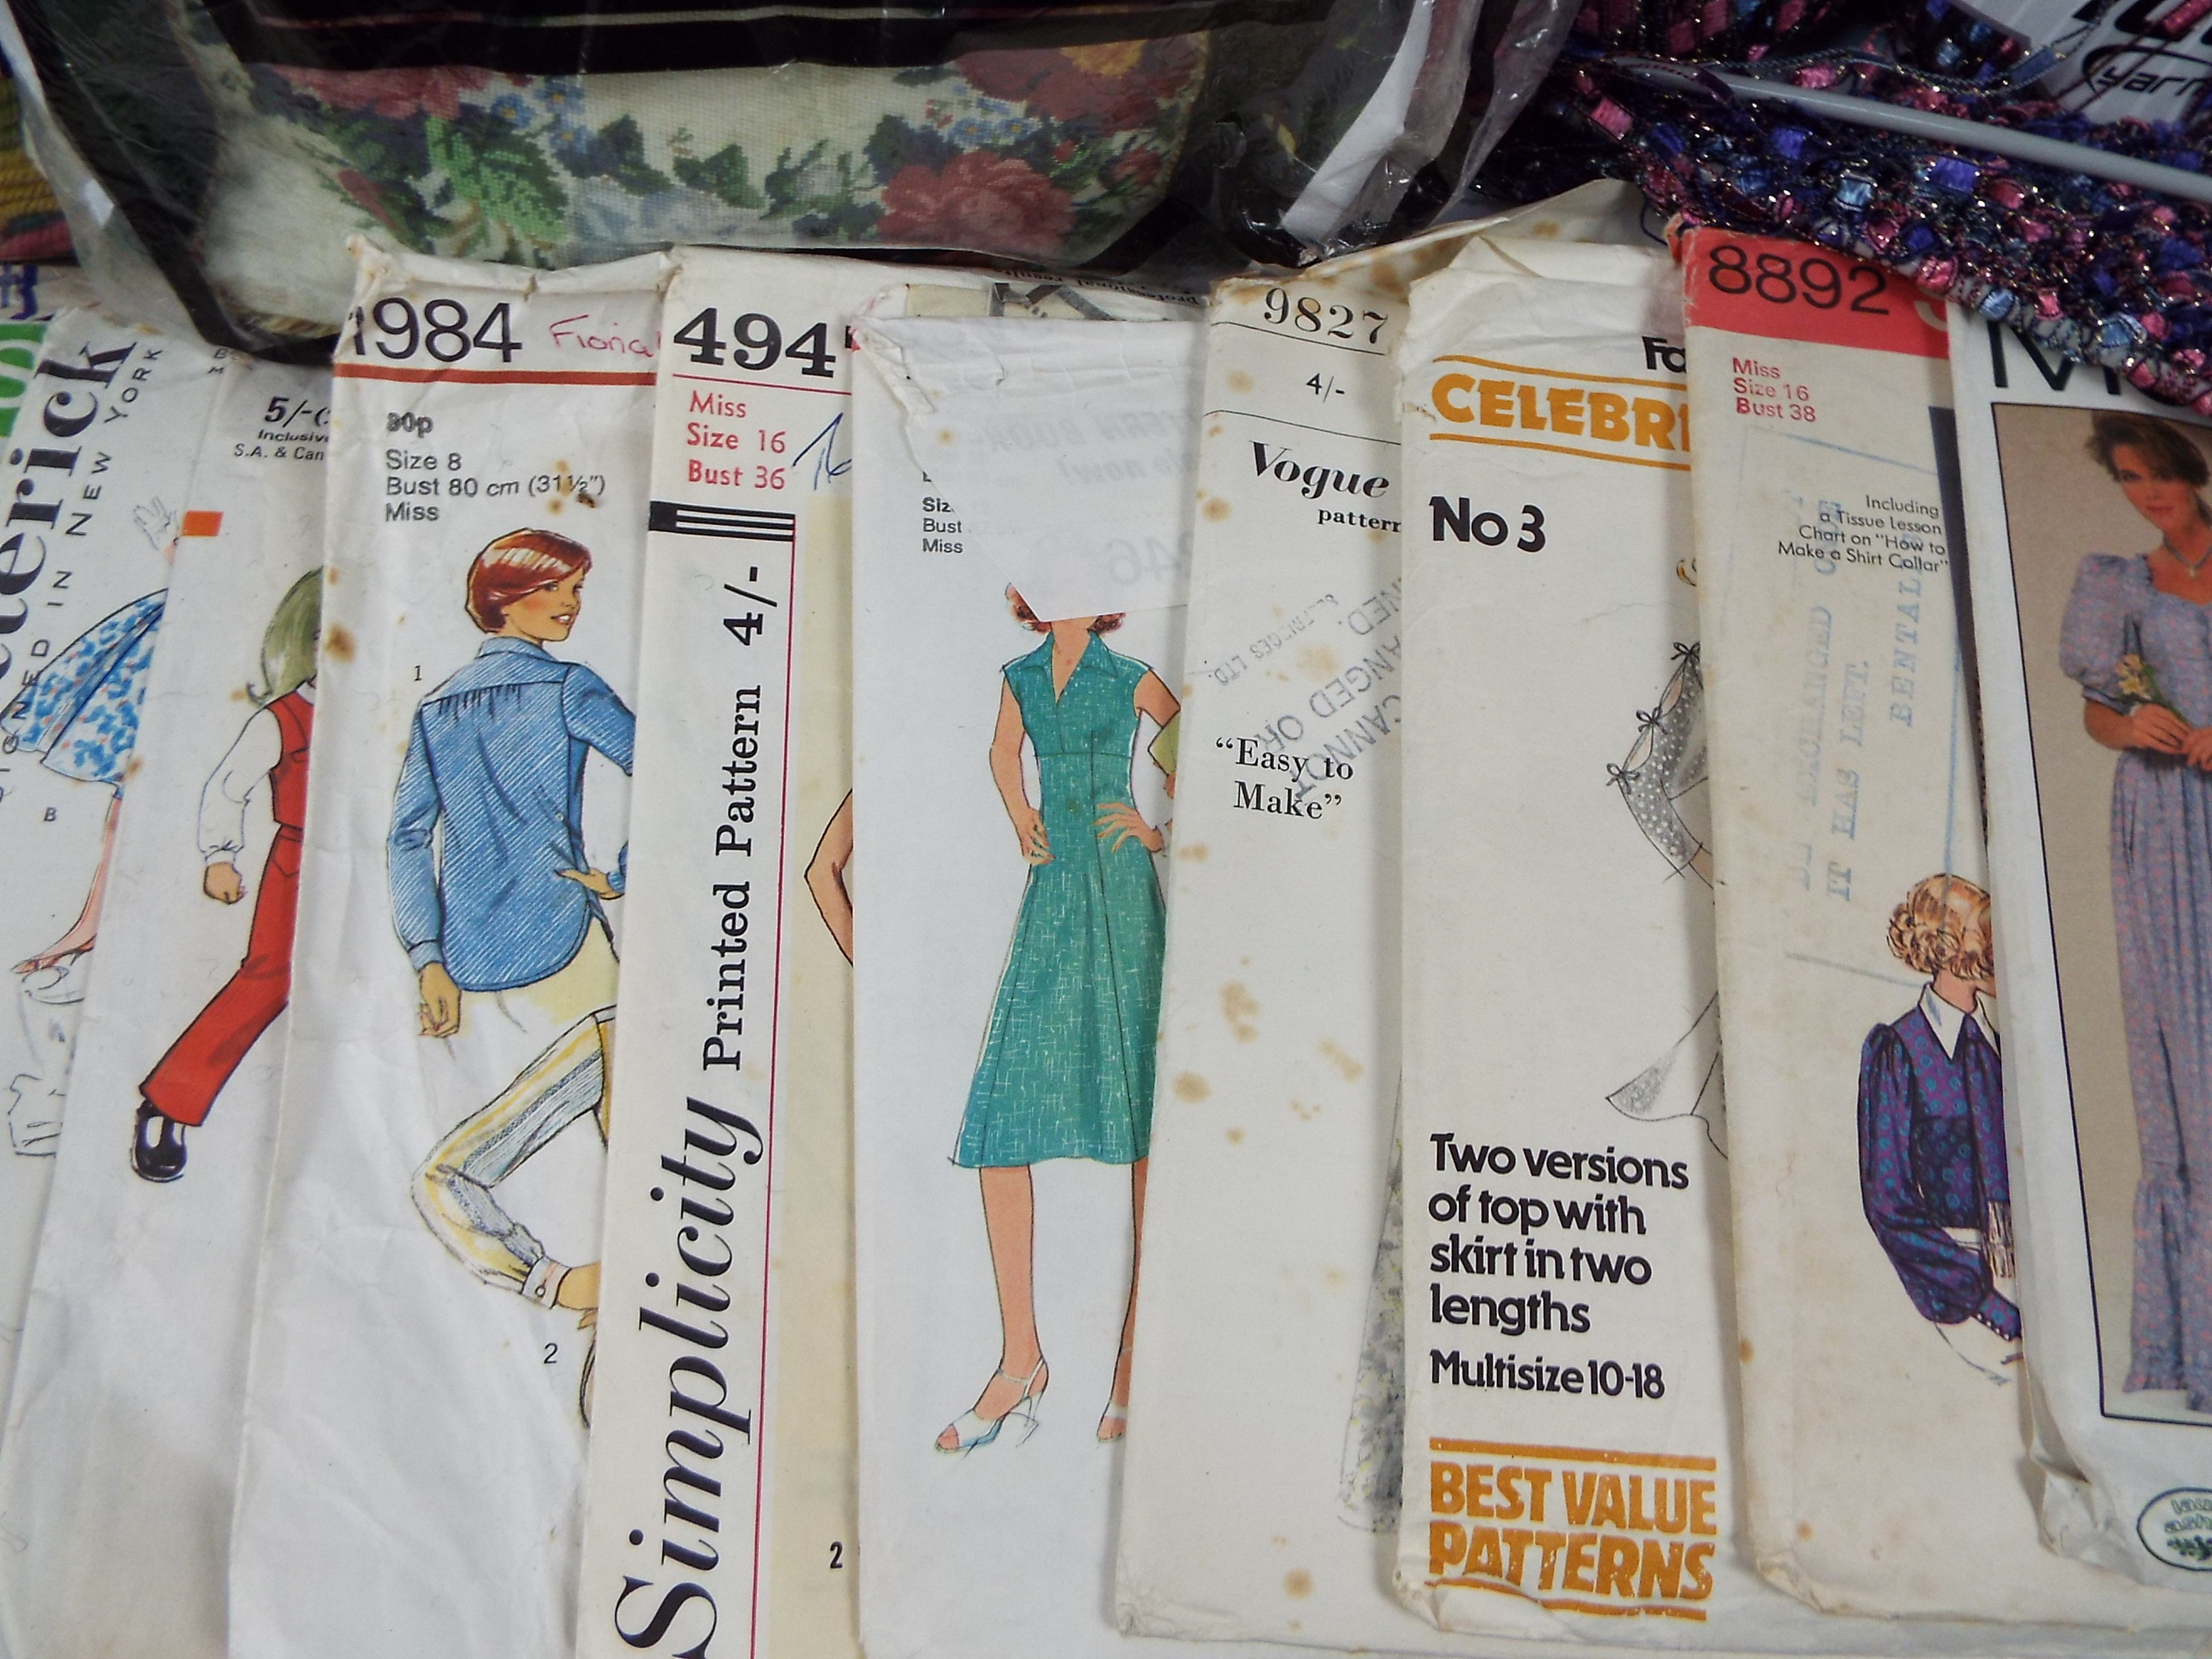 A collection of haberdashery items, sewing patterns and similar. - Image 7 of 8